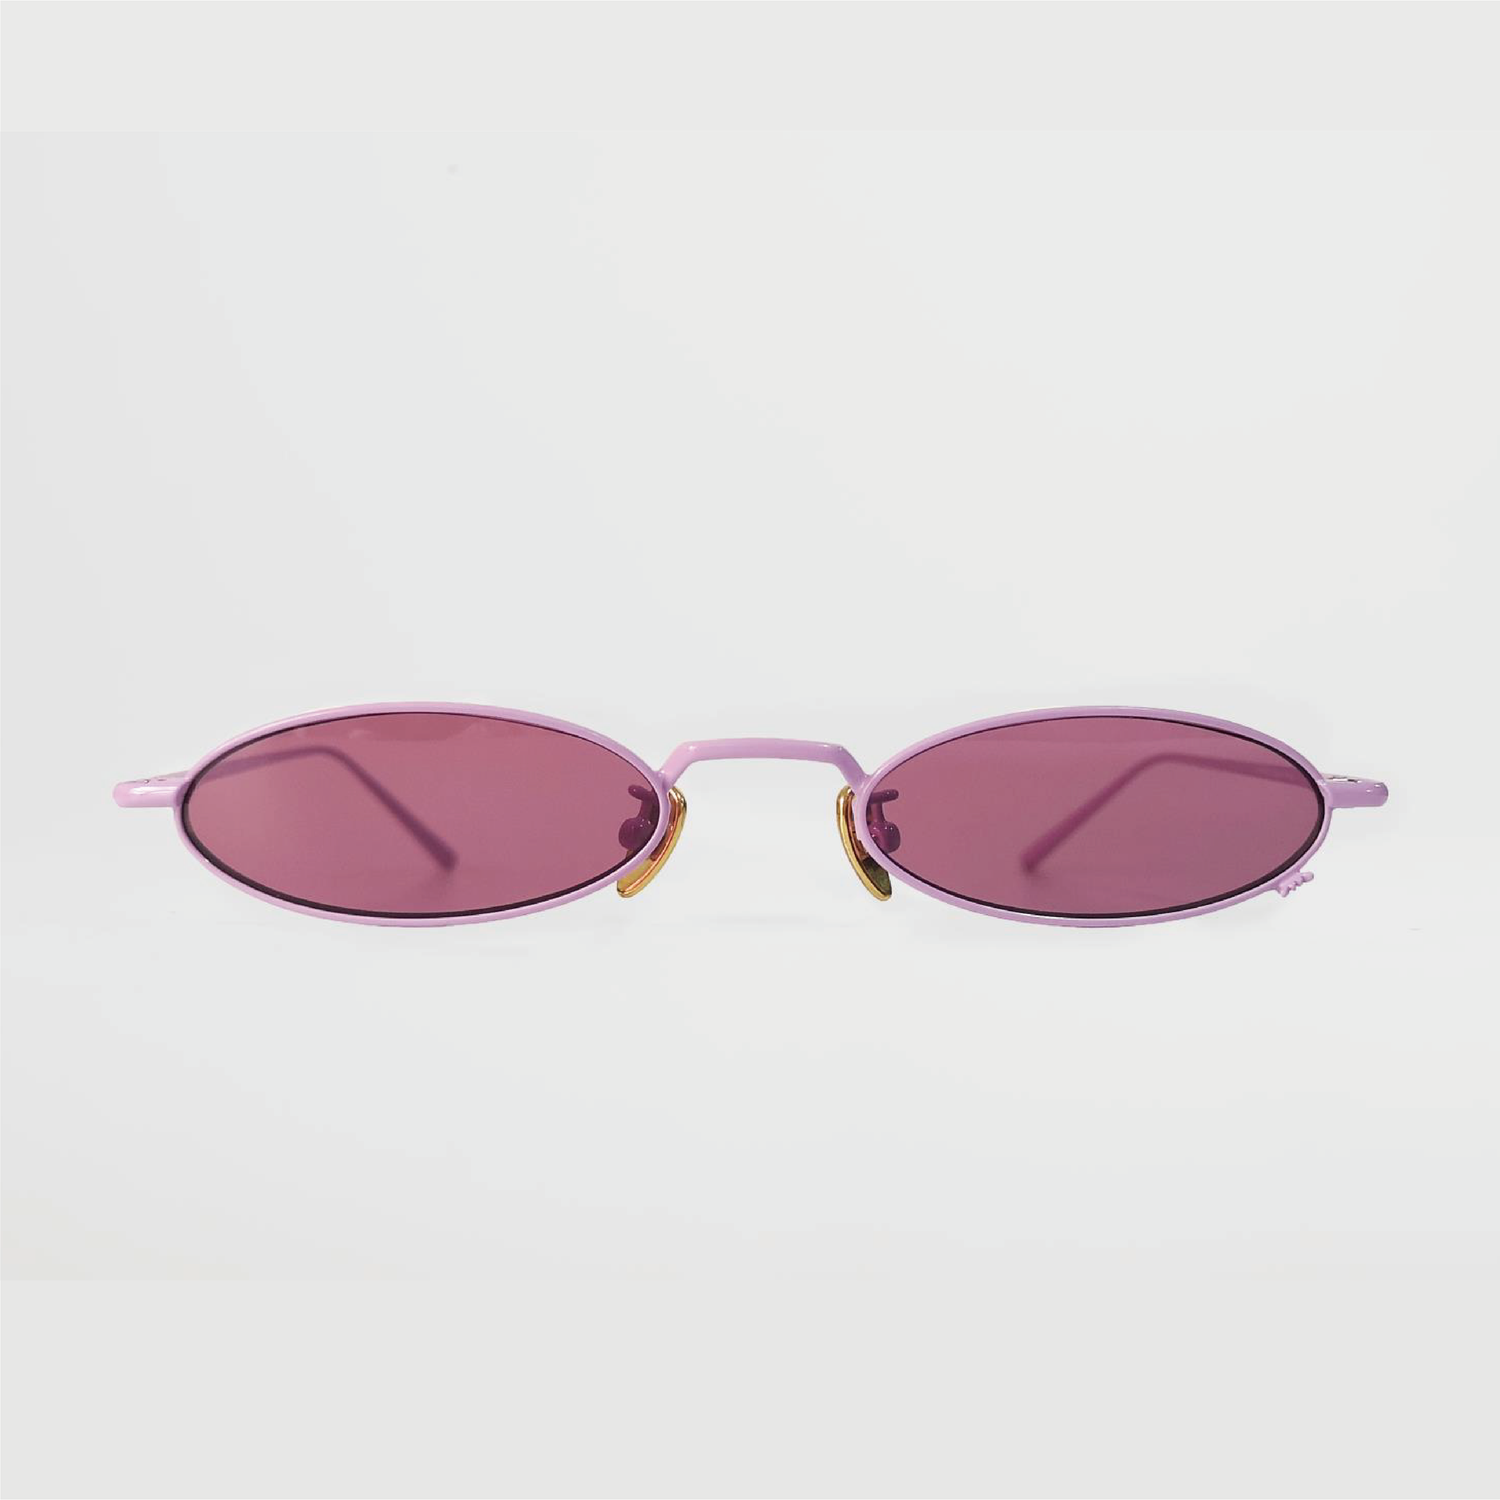 berry colour oval sunglasses in pink stainless steel frame with a tiny bug on the bottom of the right lens